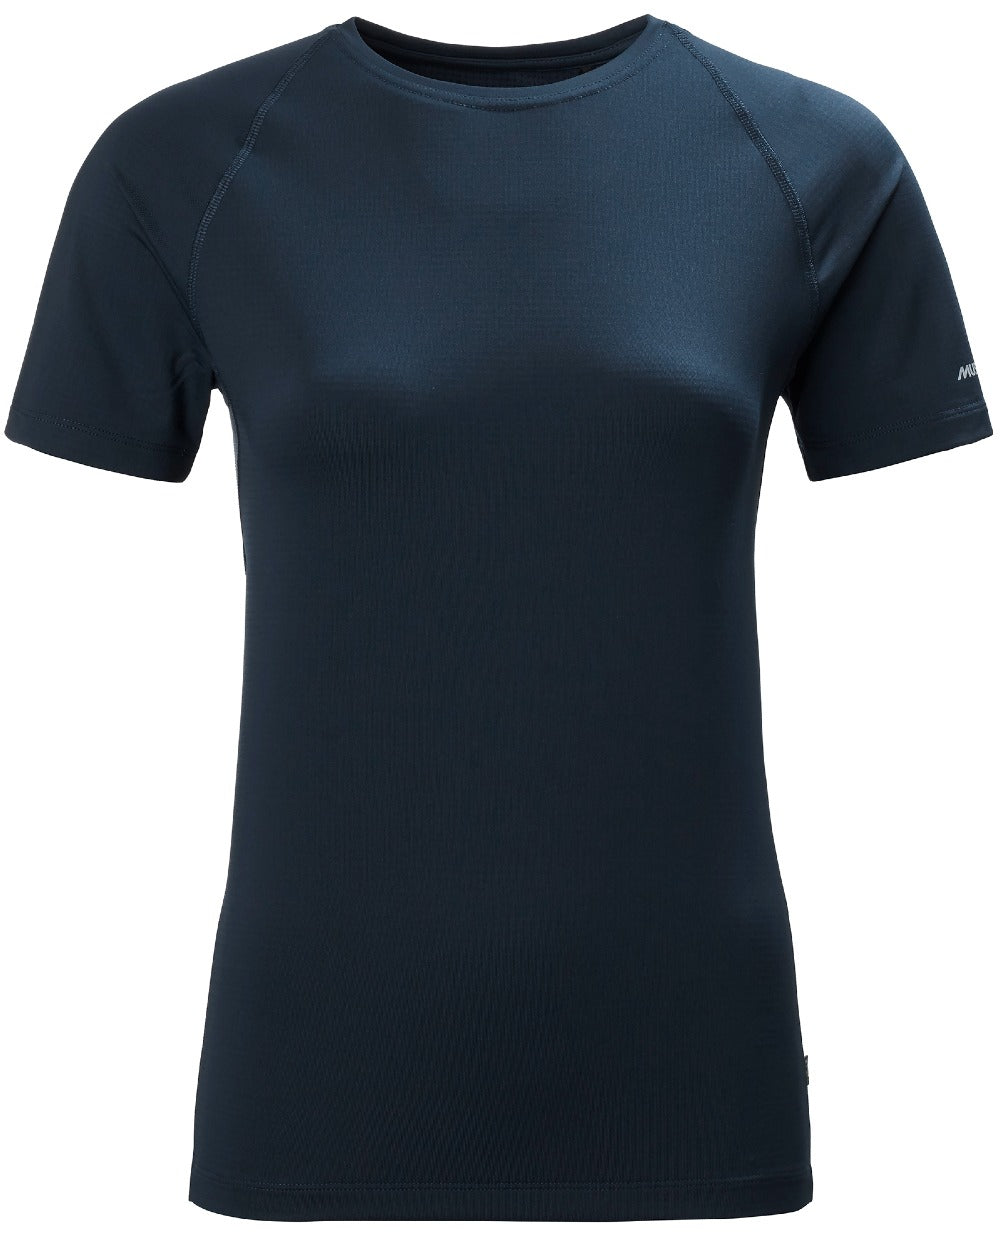 True Navy Coloured Musto Womens Evolution Sunblock Short Sleeve T-Shirt On A White Background 